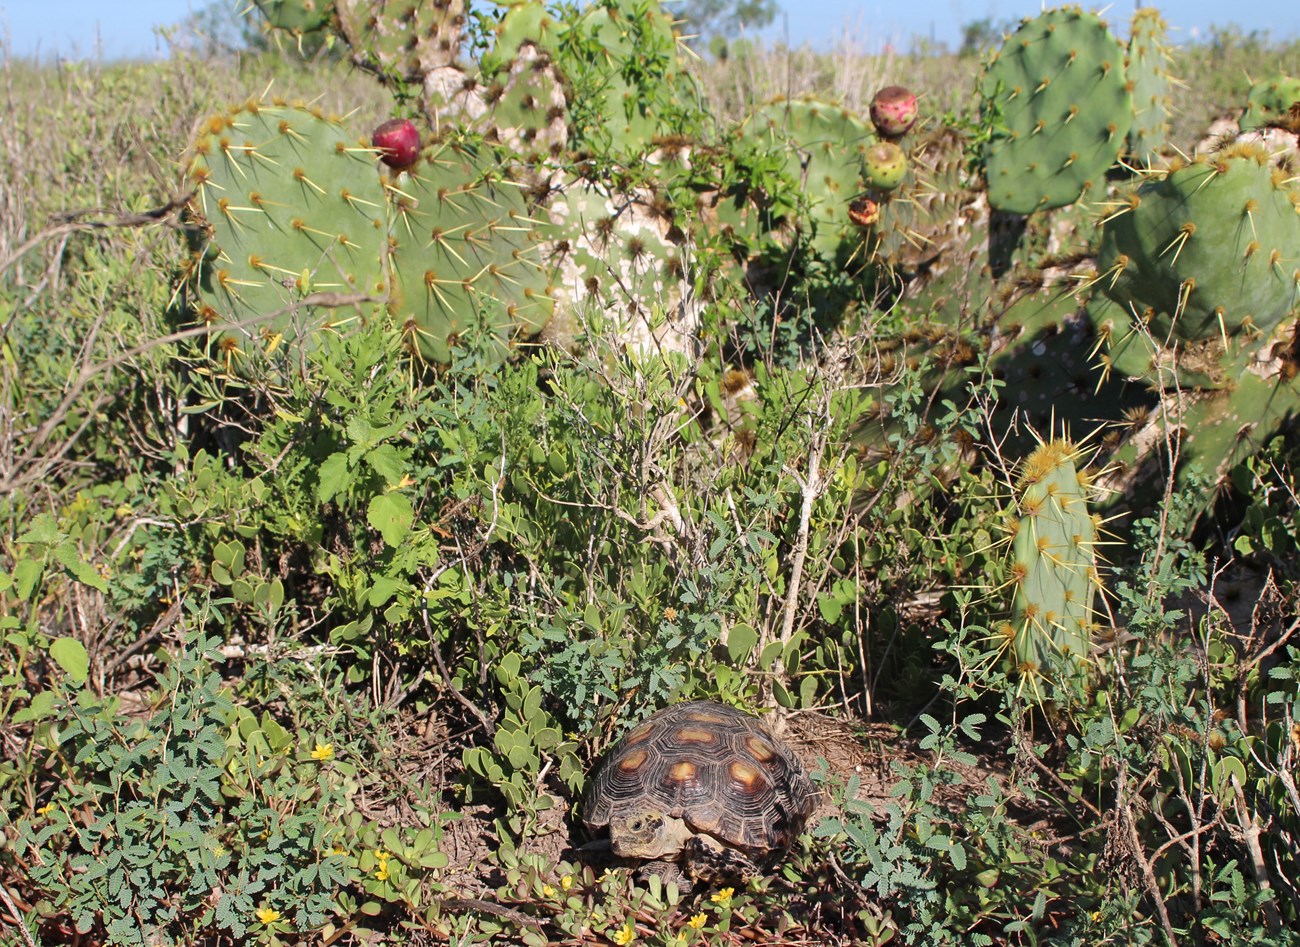 Texas tortoise in its habitat, which includes prickly pear, creeping mesquite, purslane and maytenus